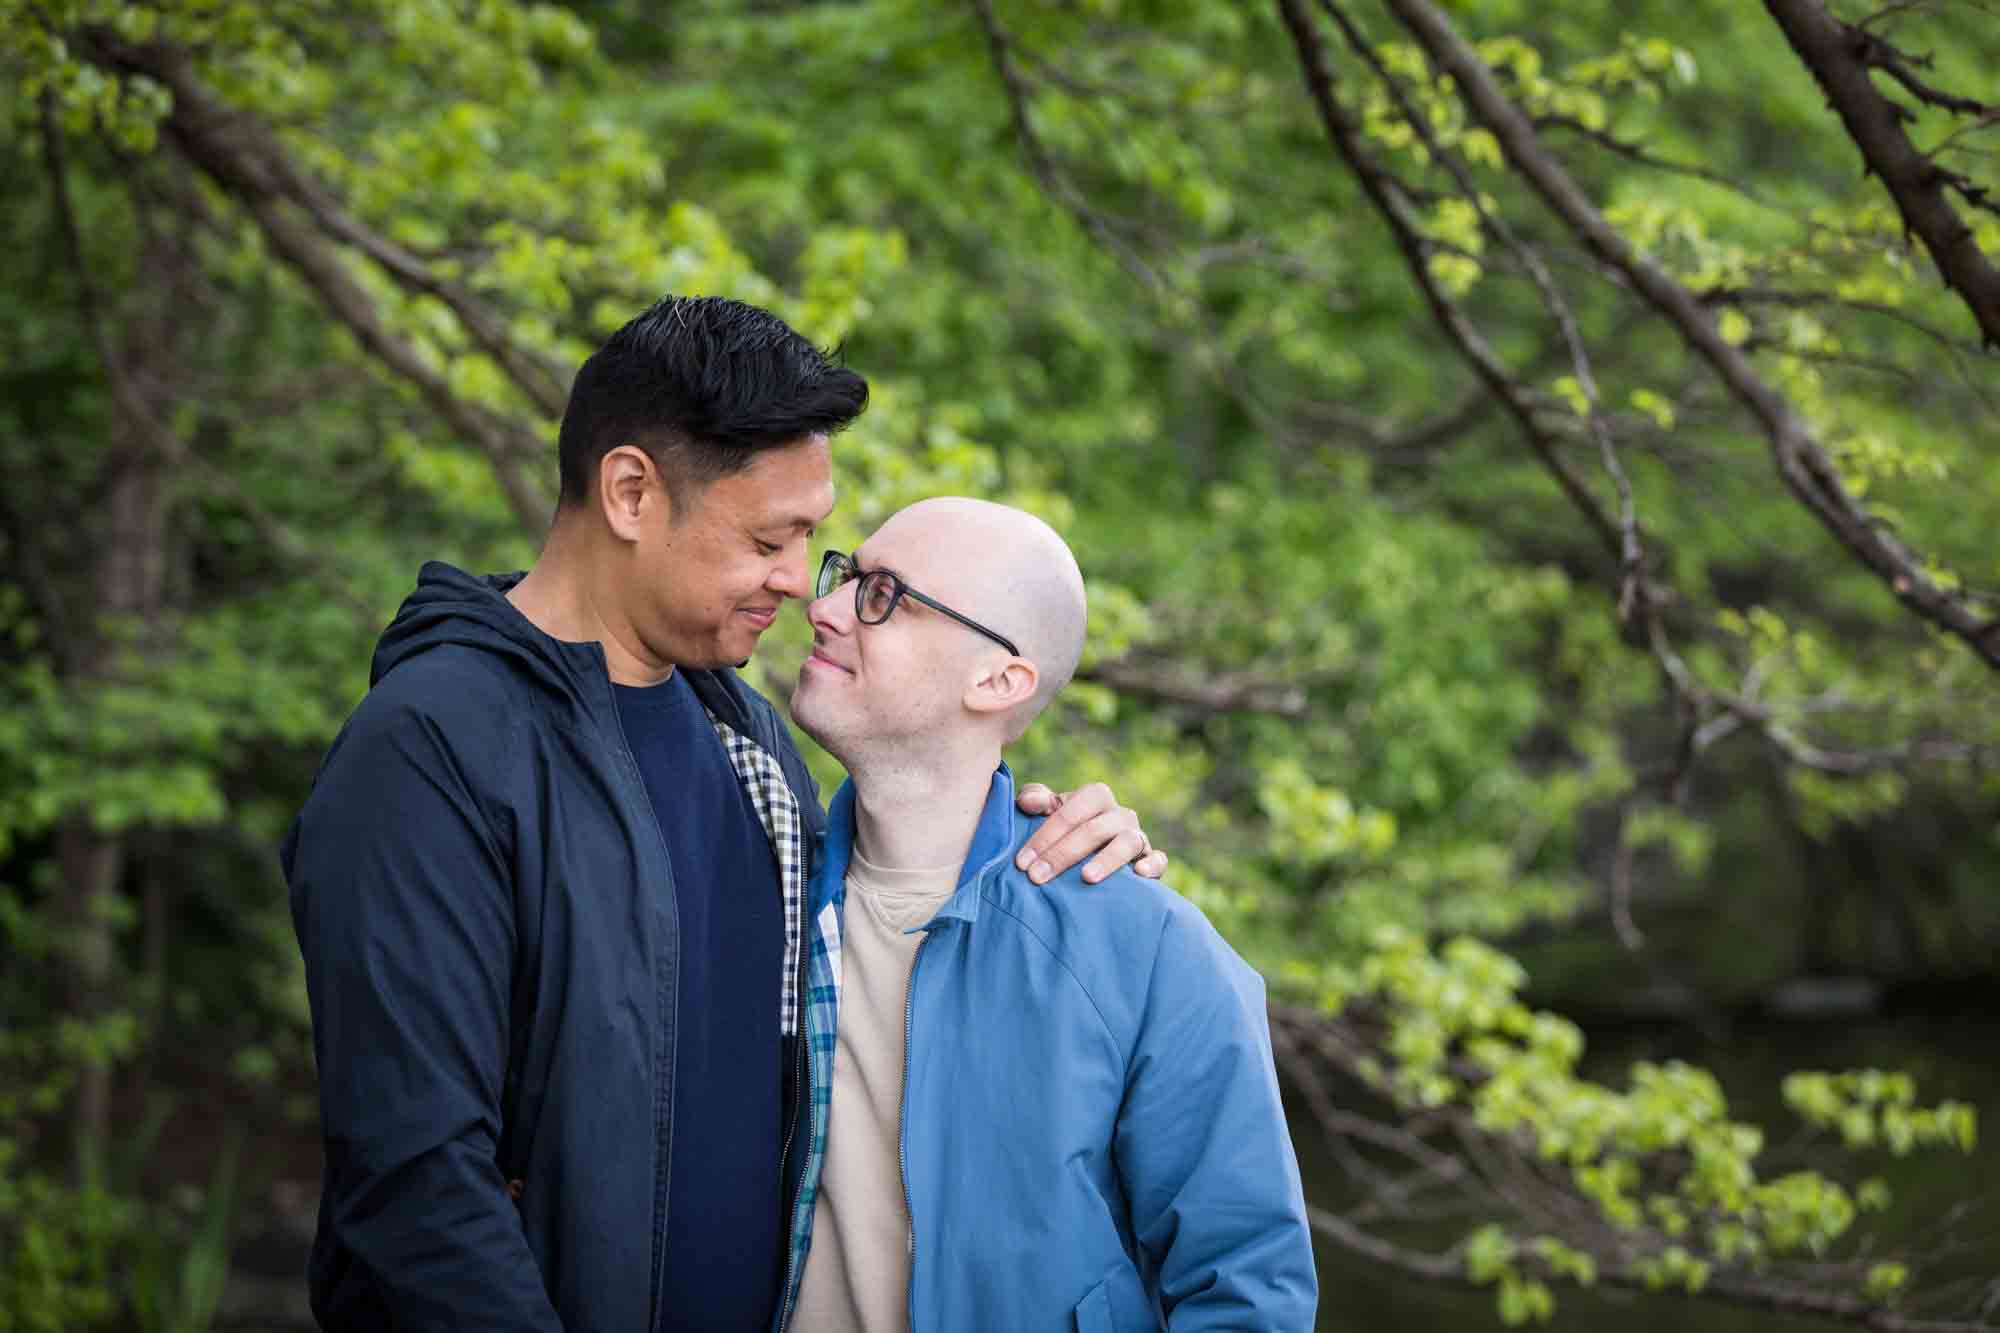 Two men hugging in front of tree branches from a Central Park engagement photo shoot